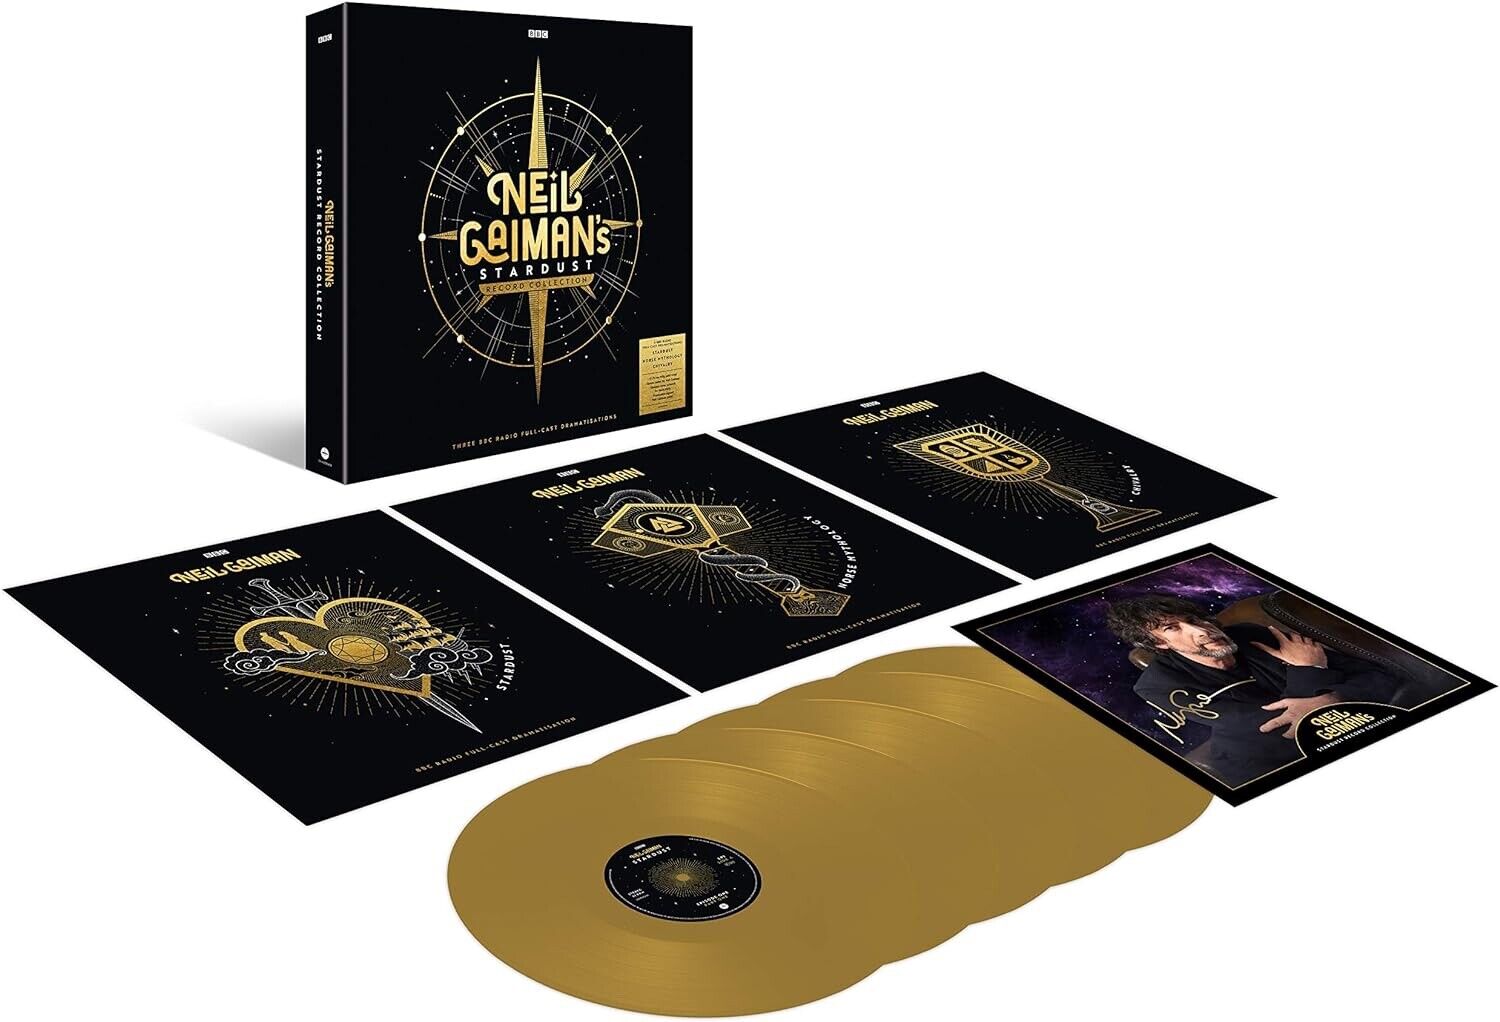 NEIL GAIMAN'S STARDUST RECORD COLLECTION [SIGNED 5 X GOLD VINYL] NEW & SEALED